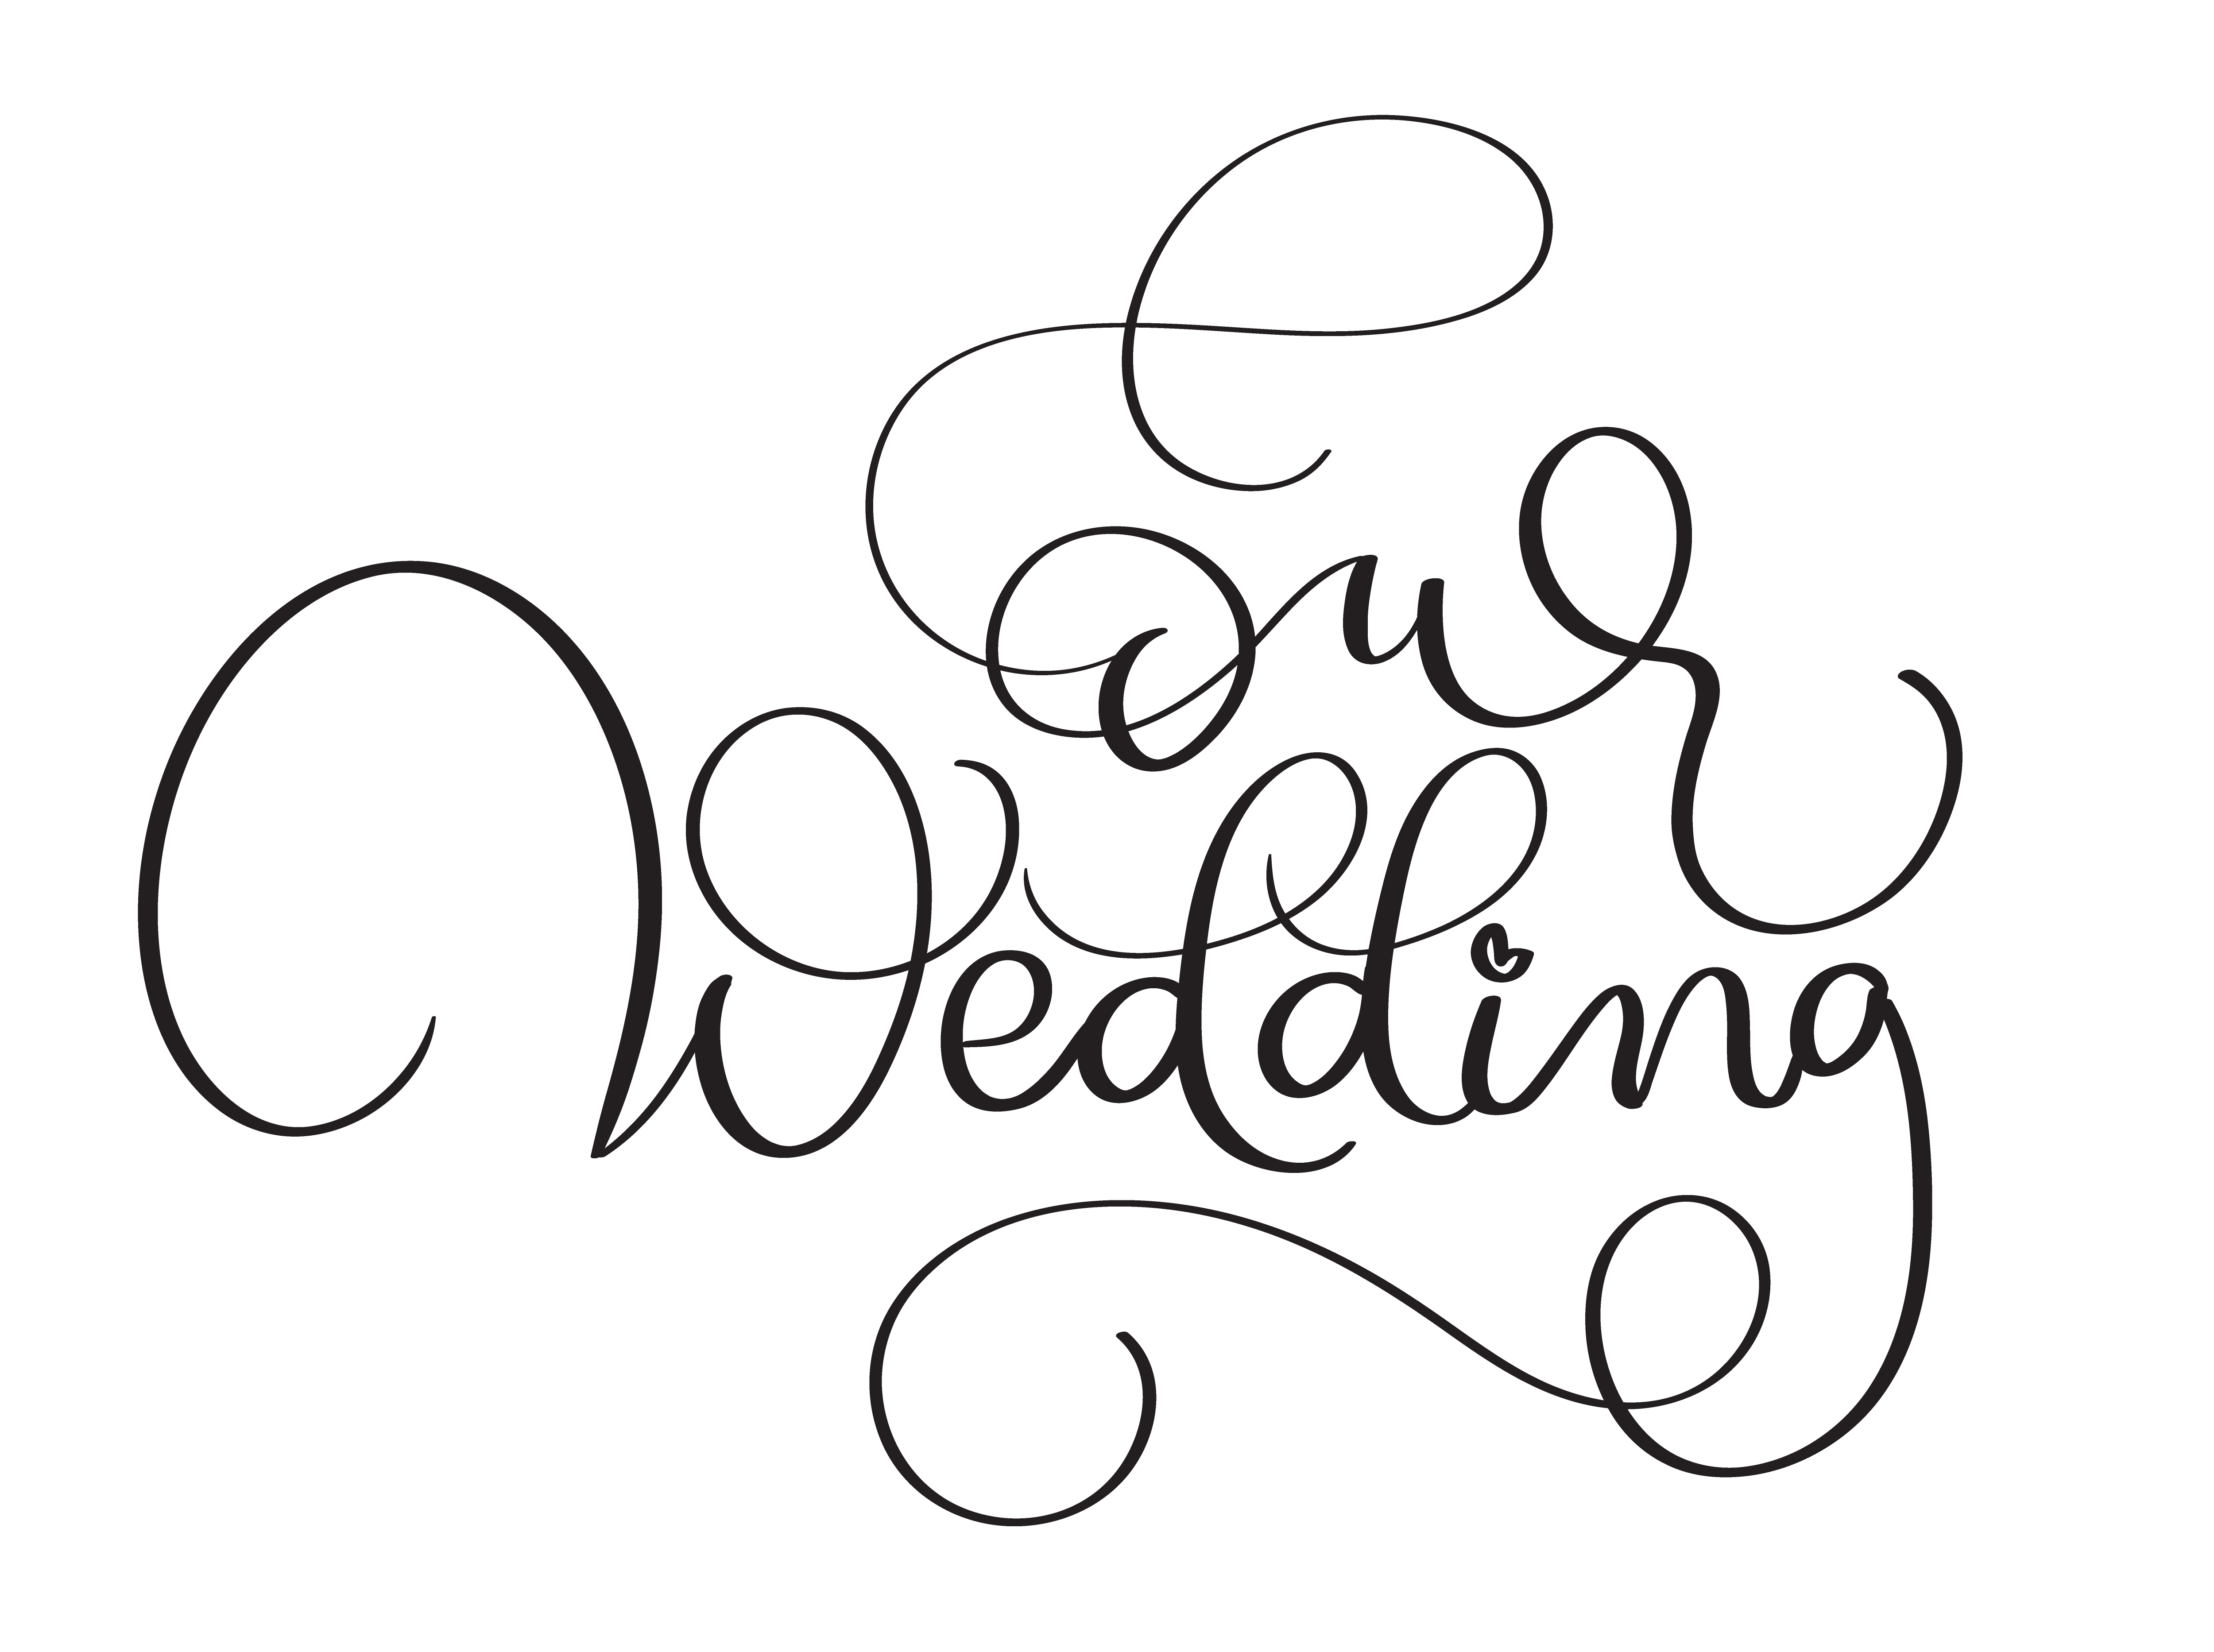 Download Our wedding text on white background. Hand drawn vintage Calligraphy lettering Vector ...